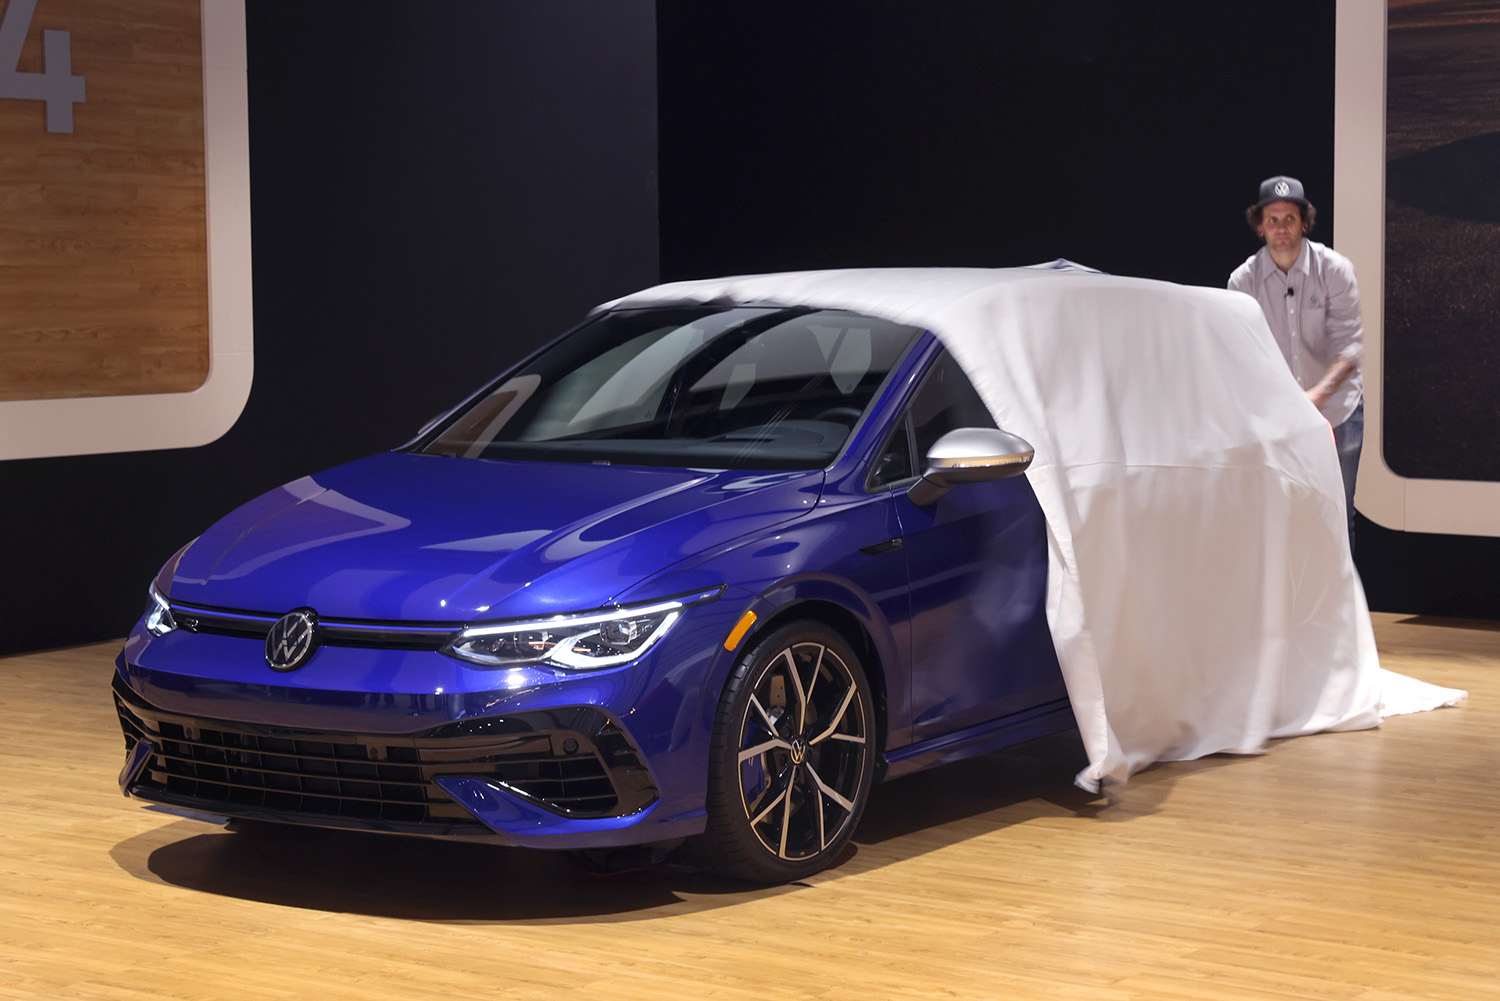 The 2022 Golf GTI is introduced to the media at the Chicago Auto Show on July 14, 2021 in Chicago, Illinois.